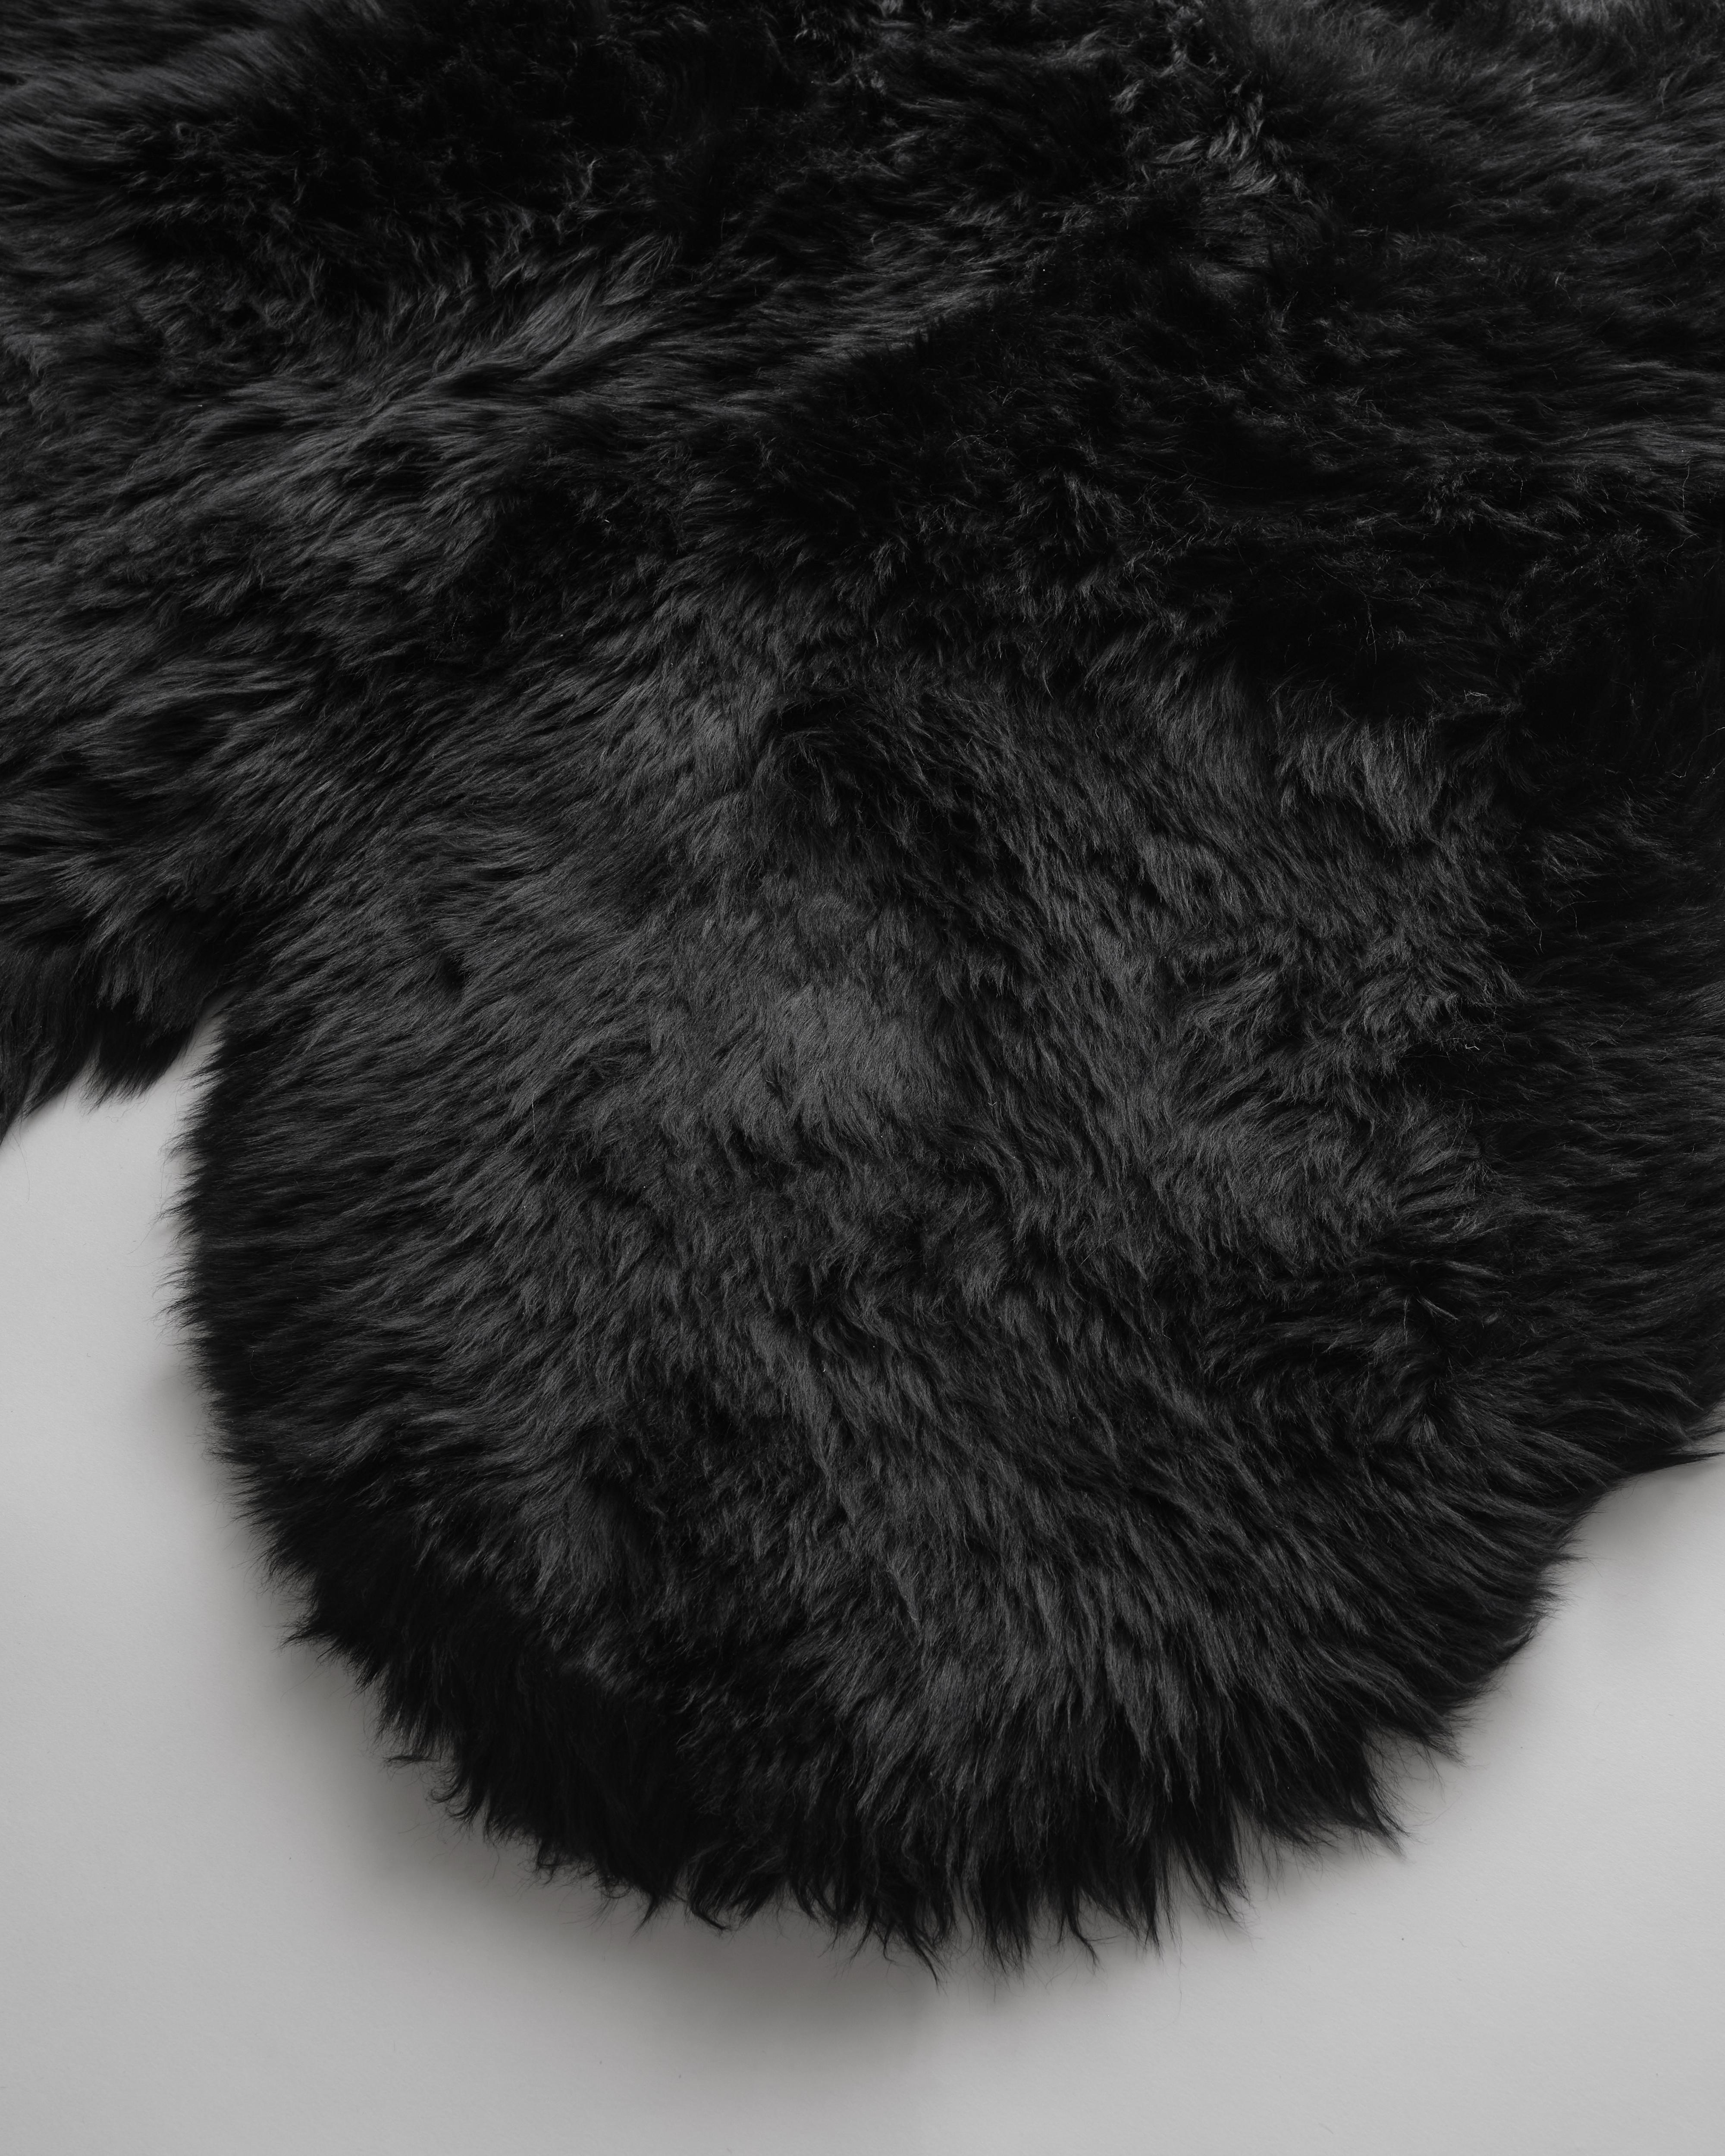 The naturalness and softness of a sheepskin rug can quickly elevate a room's beauty. On the floor, thrown over chairs and couches, this versatile design piece is a favorite of the Forsyth design team. 

This thick and beautiful sheepskin, dyed a